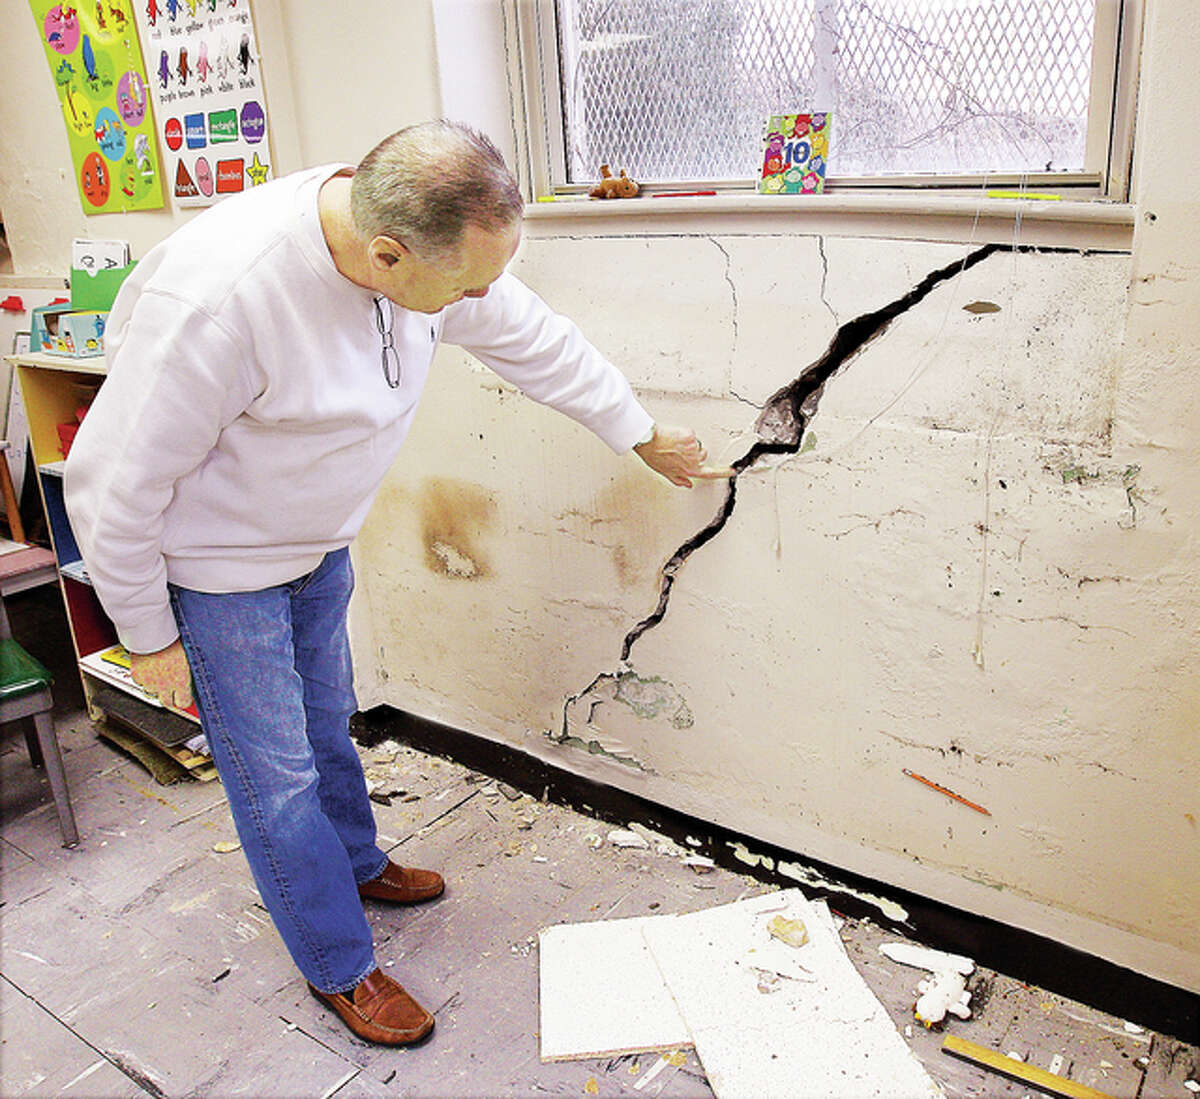 Ss Peter & Paul School principal Harry Cavanaugh examines a giant crack in the basement wall of the State Street Alton school Wednesday. Something is causing the northeast corner of the schools foundation to sag, making it unsafe for students who will move to Mark Twain School on Milton Road. Parents have raised concerns about the disruption of asbestos floor tiles which are breaking and popping up. The cracks extend to the upper floors of the school built in 1908.